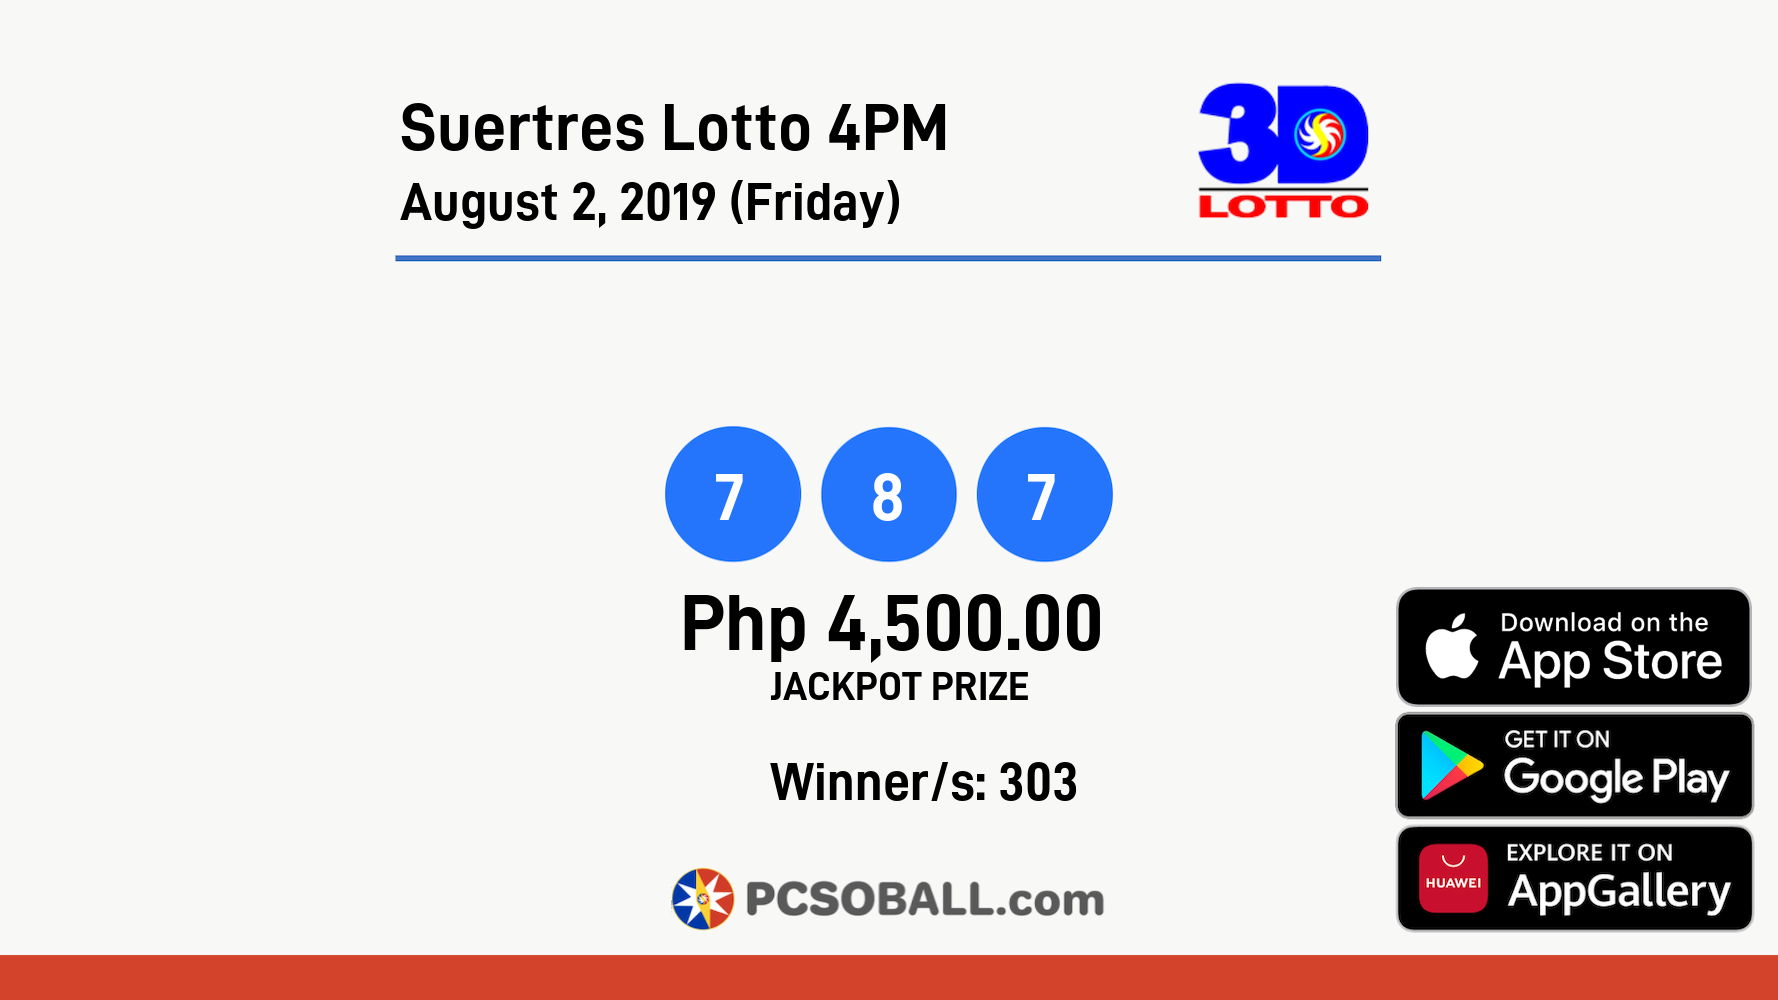 Suertres Lotto 4PM August 2, 2019 (Friday) Result